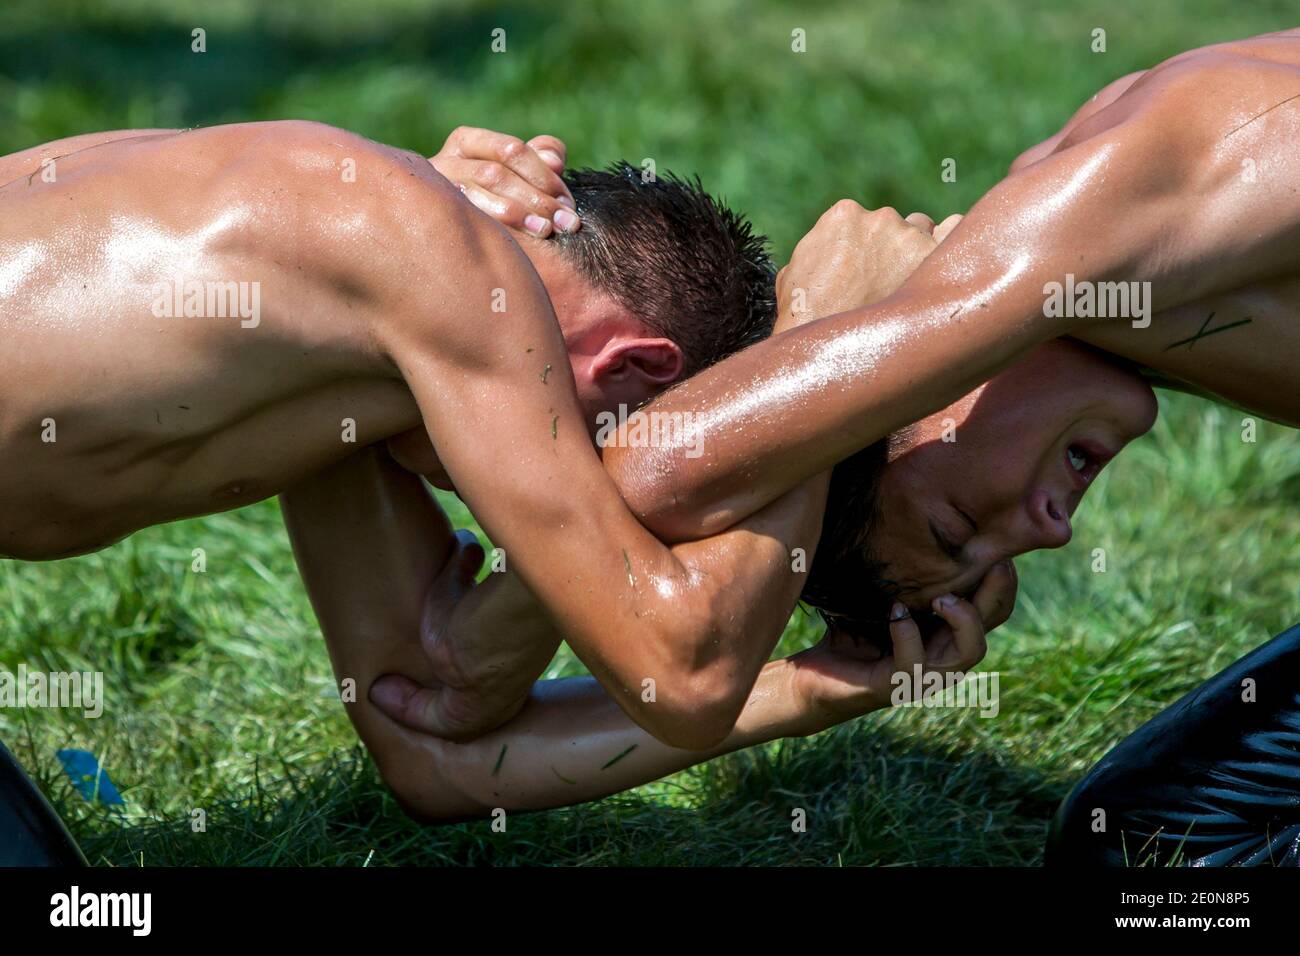 Young wrestlers with their arms locked together battle for victory at the Elmali Turkish Oil Wrestling Festival in Turkey. Stock Photo